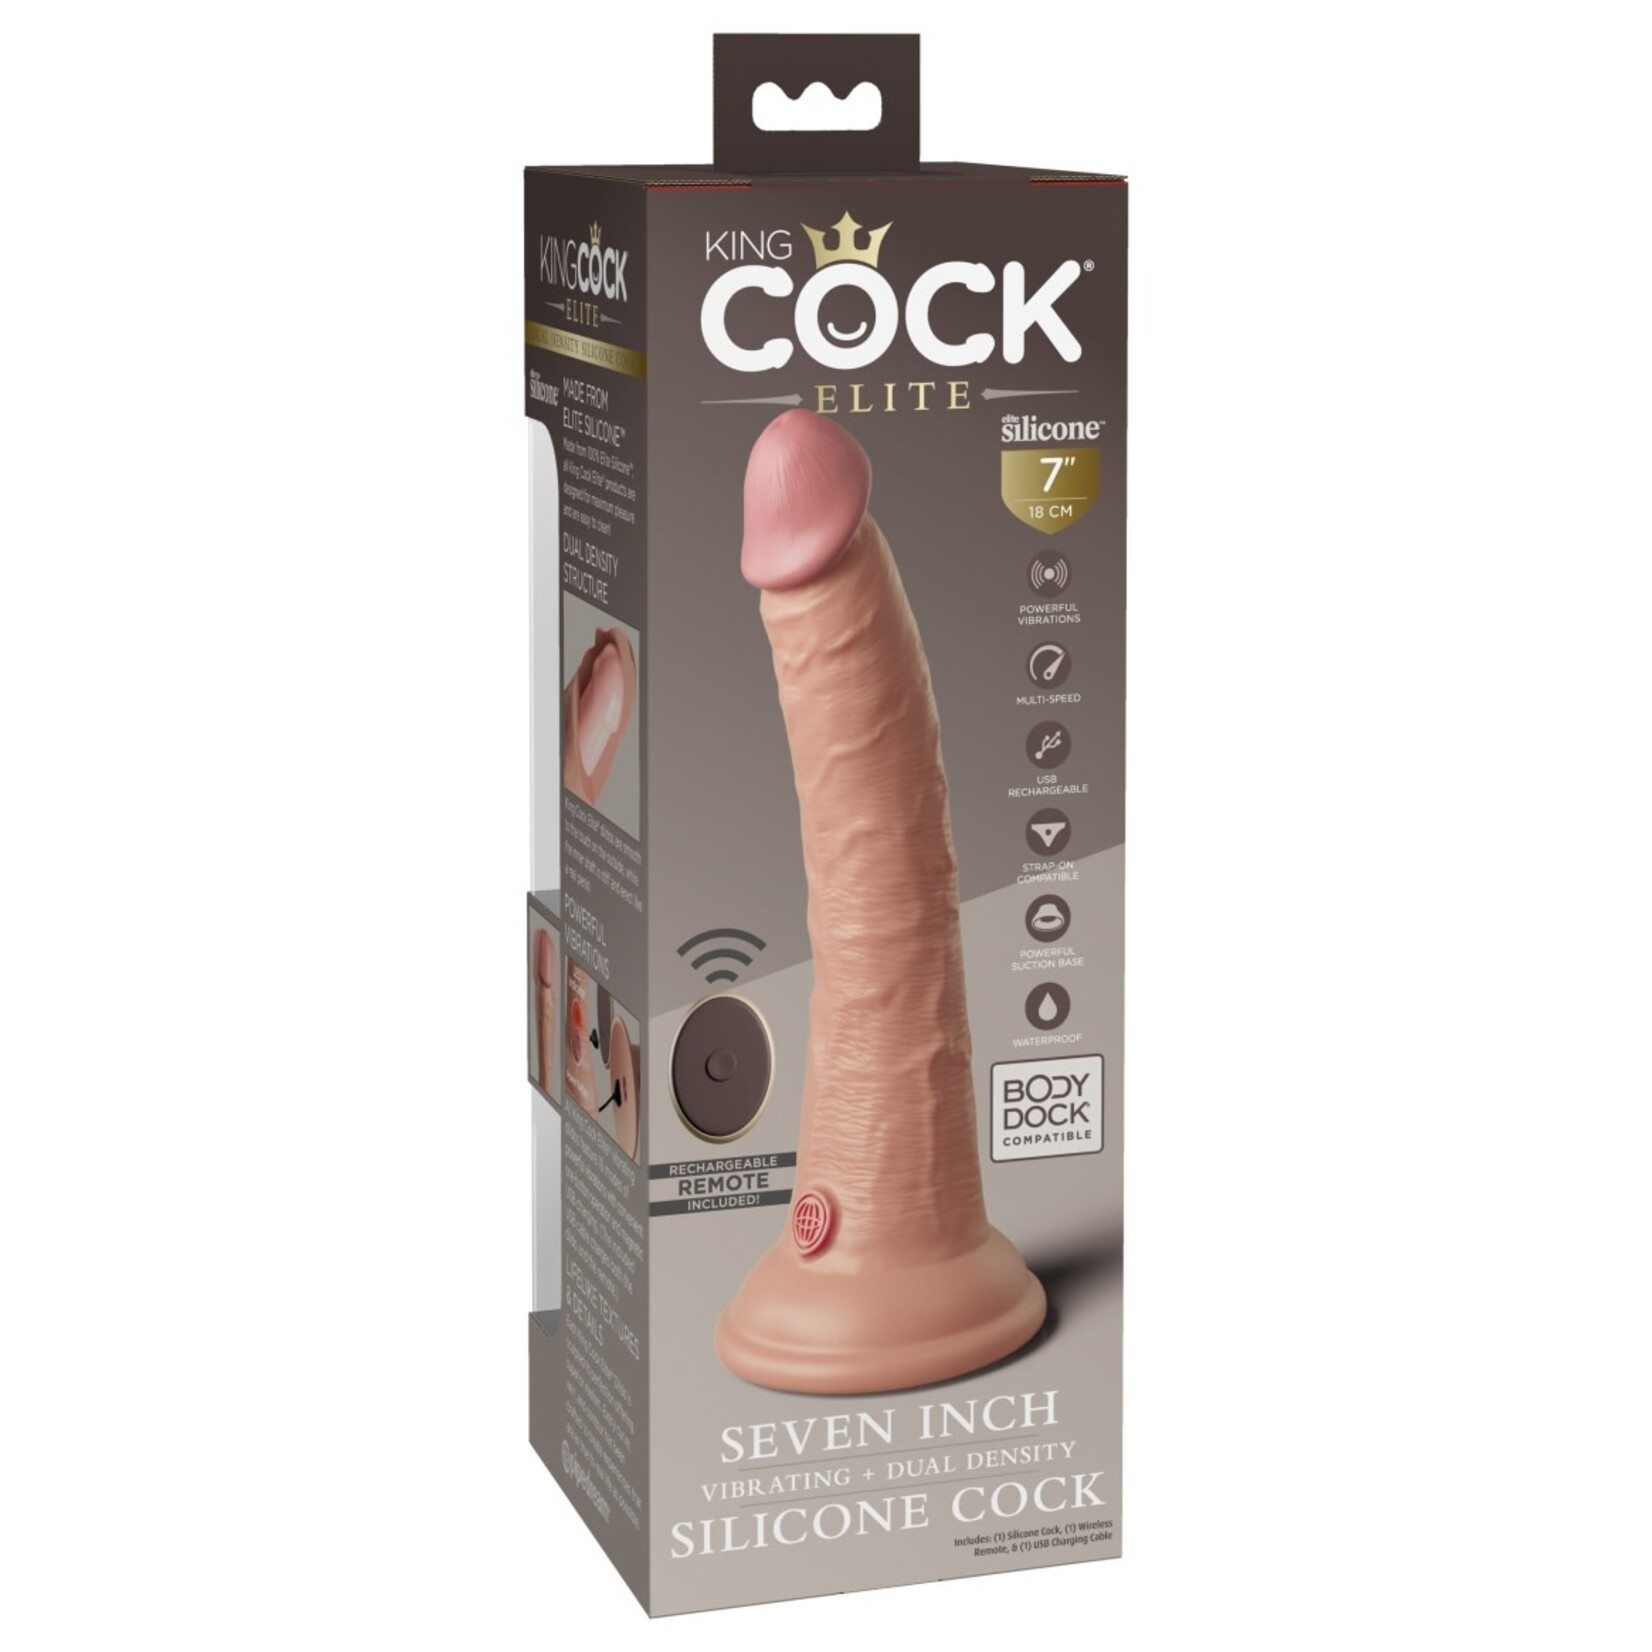 KING COCK KING COCK ELITE 7" DUAL DENSITY VIBRATING SILICONE COCK WITH REMOTE - LIGHT